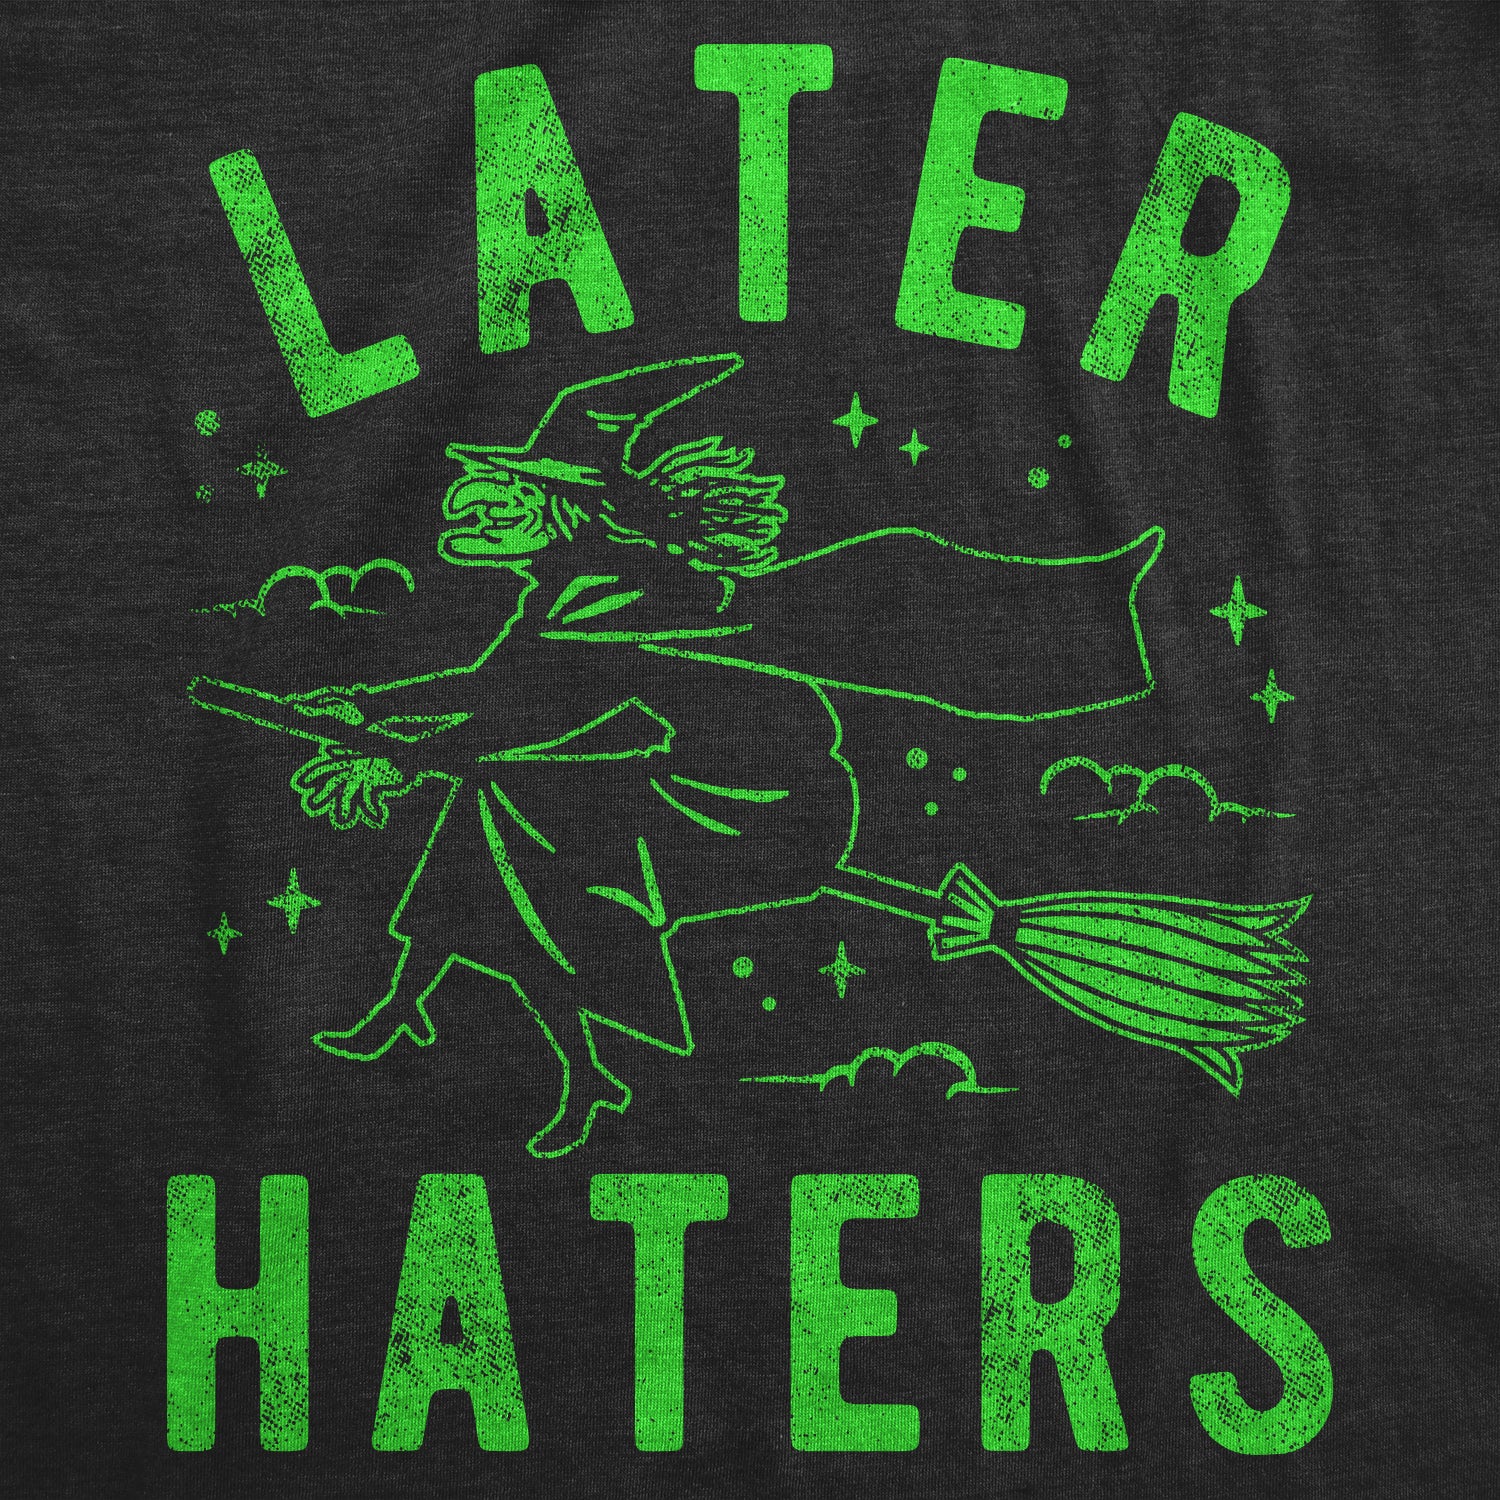 Funny Heather Black - HATERS Later Haters Womens T Shirt Nerdy Halloween Sarcastic Tee